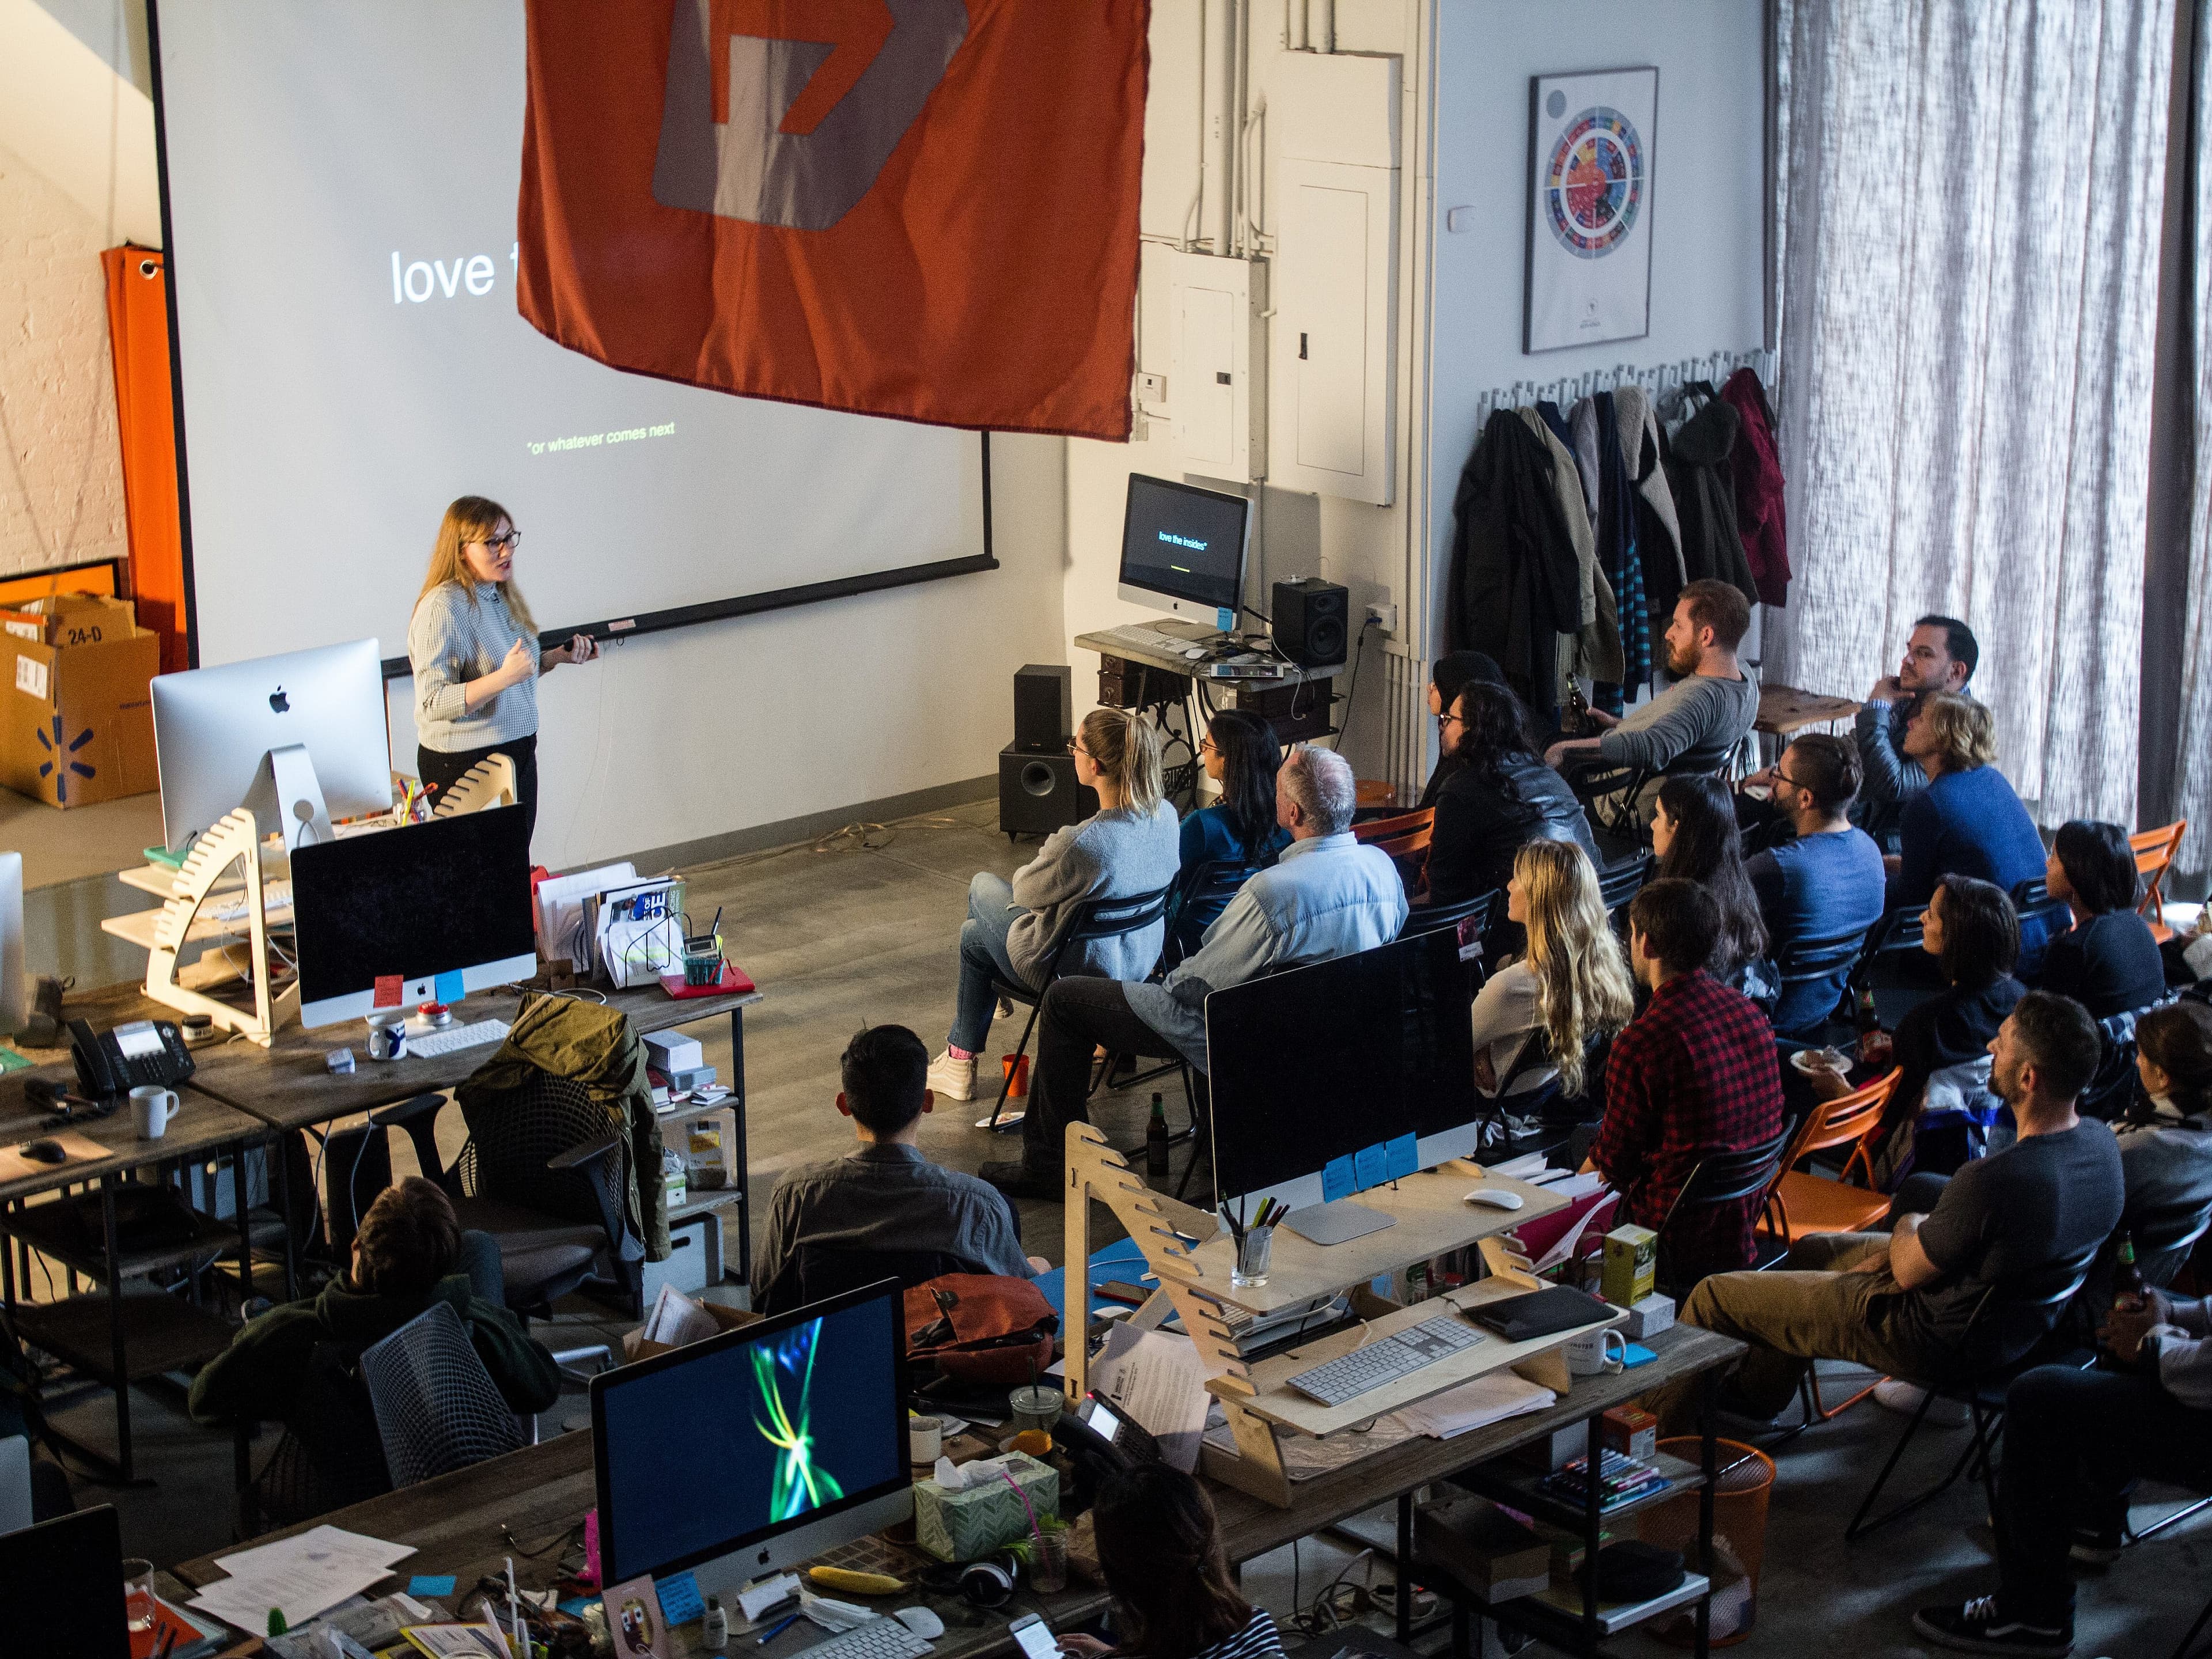 A woman stands in front of a projector screen giving a presentation to a seated audience in a cluttered office space. The screen displays the word "love" and a red flag hangs from the ceiling. People are attentively watching and taking notes.